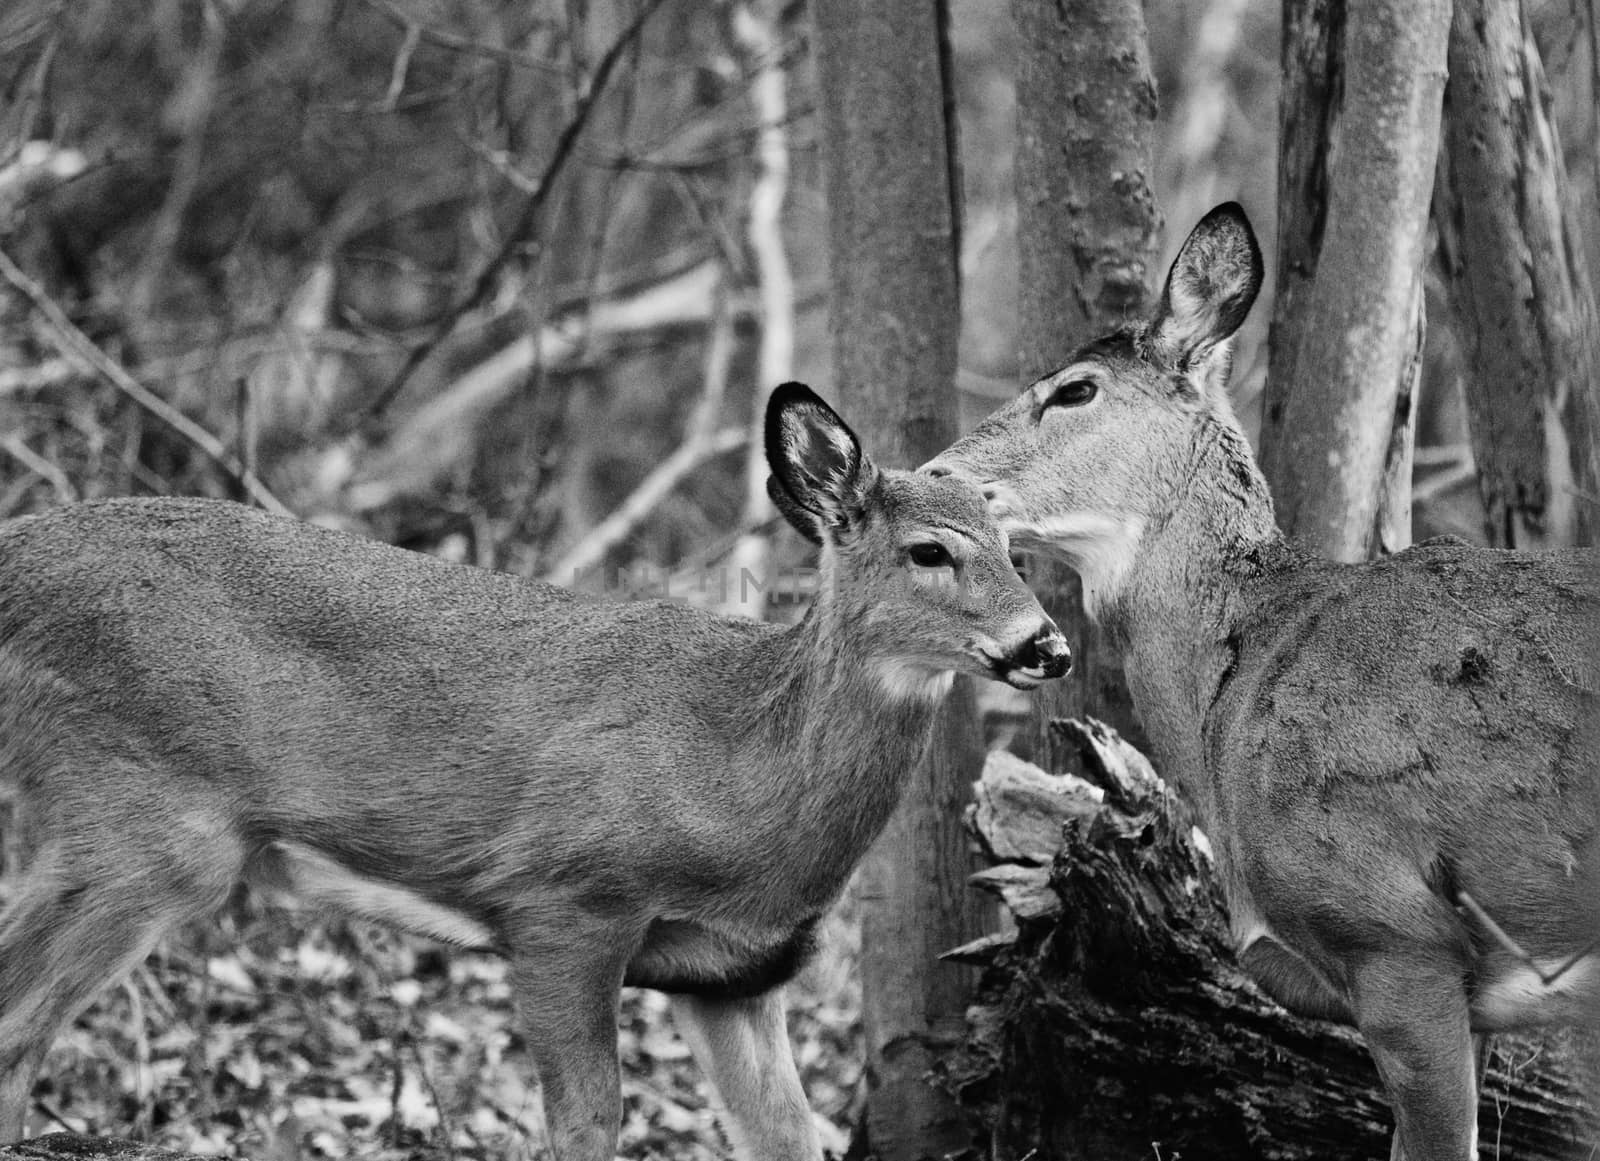 Beautiful image with the deers in love by teo